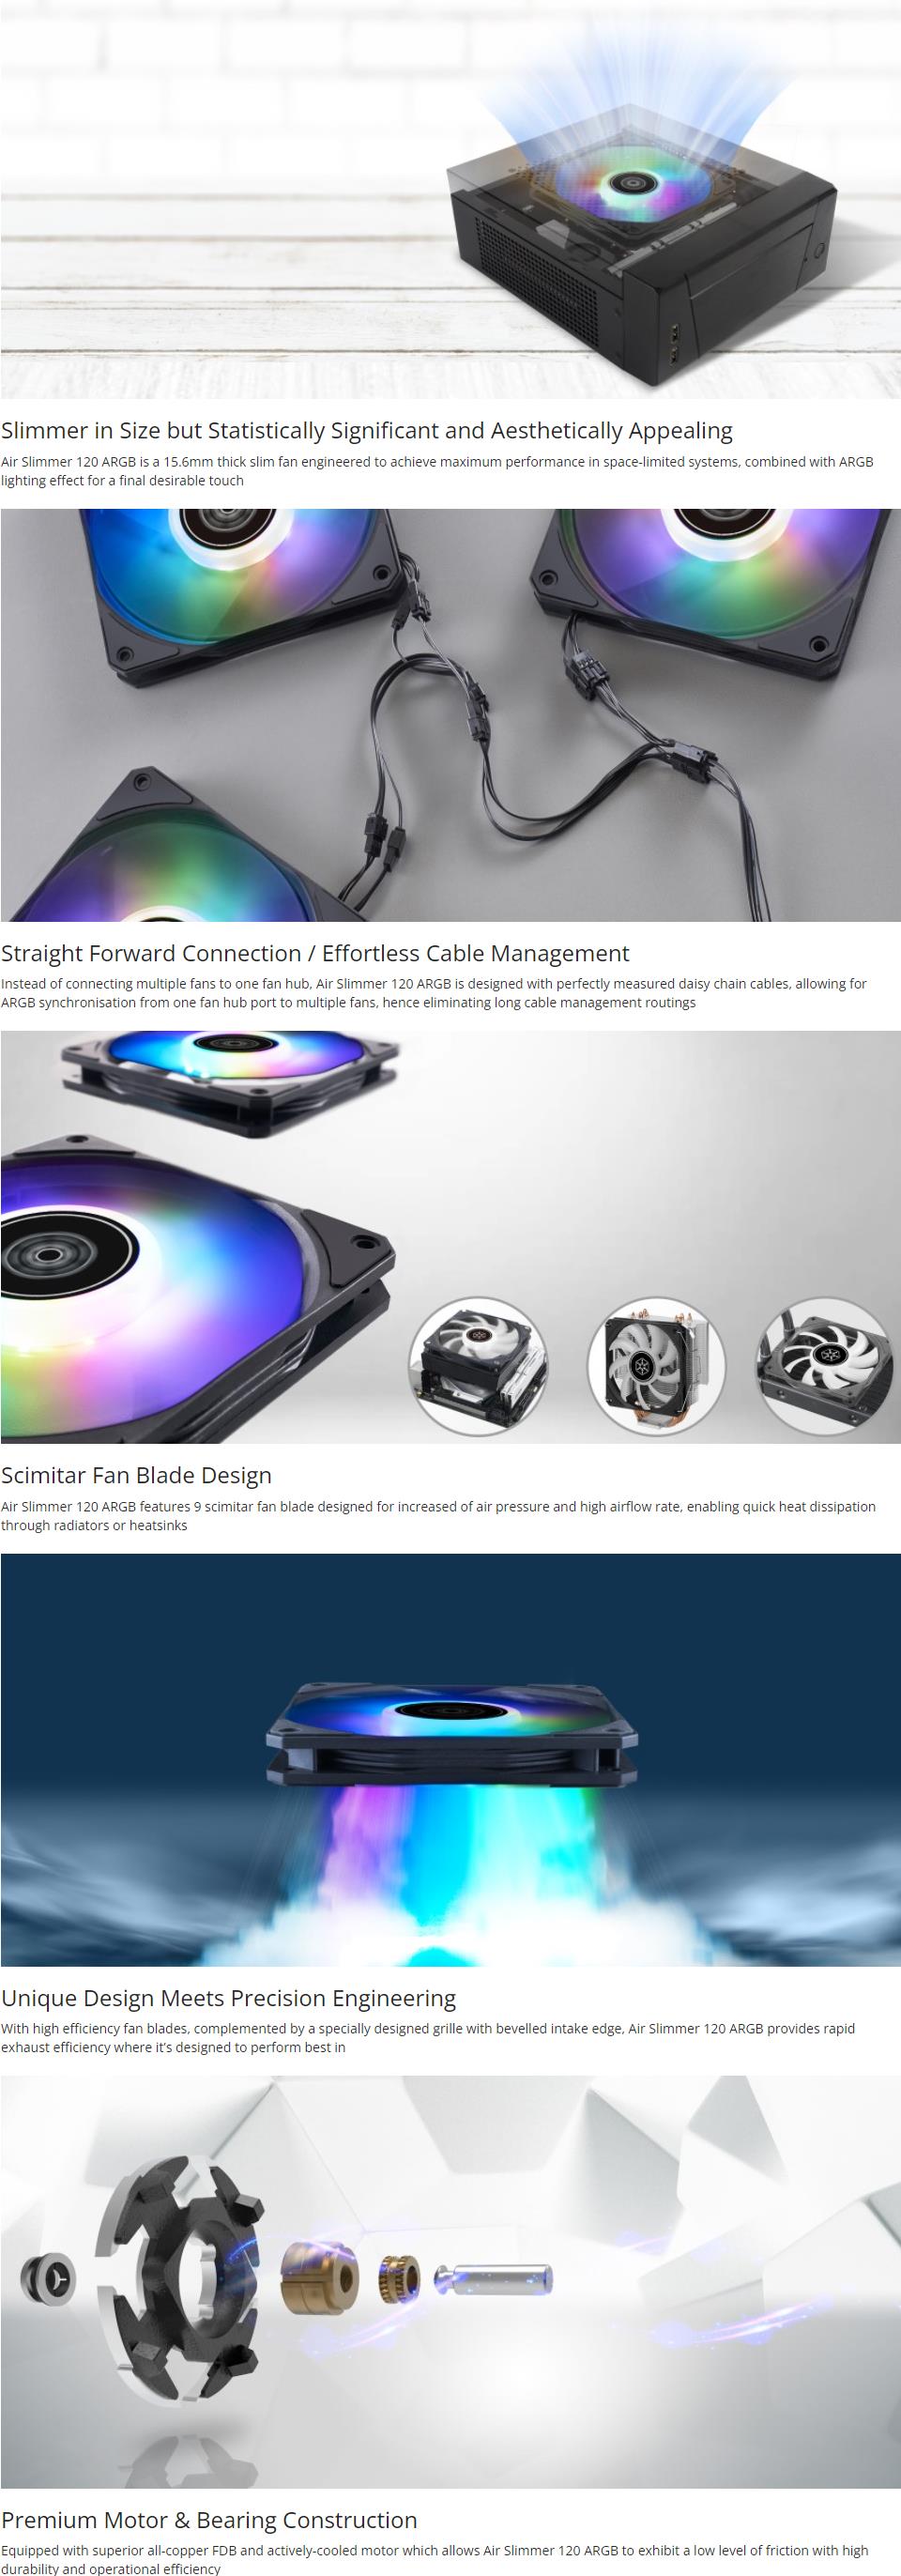 A large marketing image providing additional information about the product Silverstone Air Slimmer ARGB 120mm PWM Cooling Fan - Additional alt info not provided